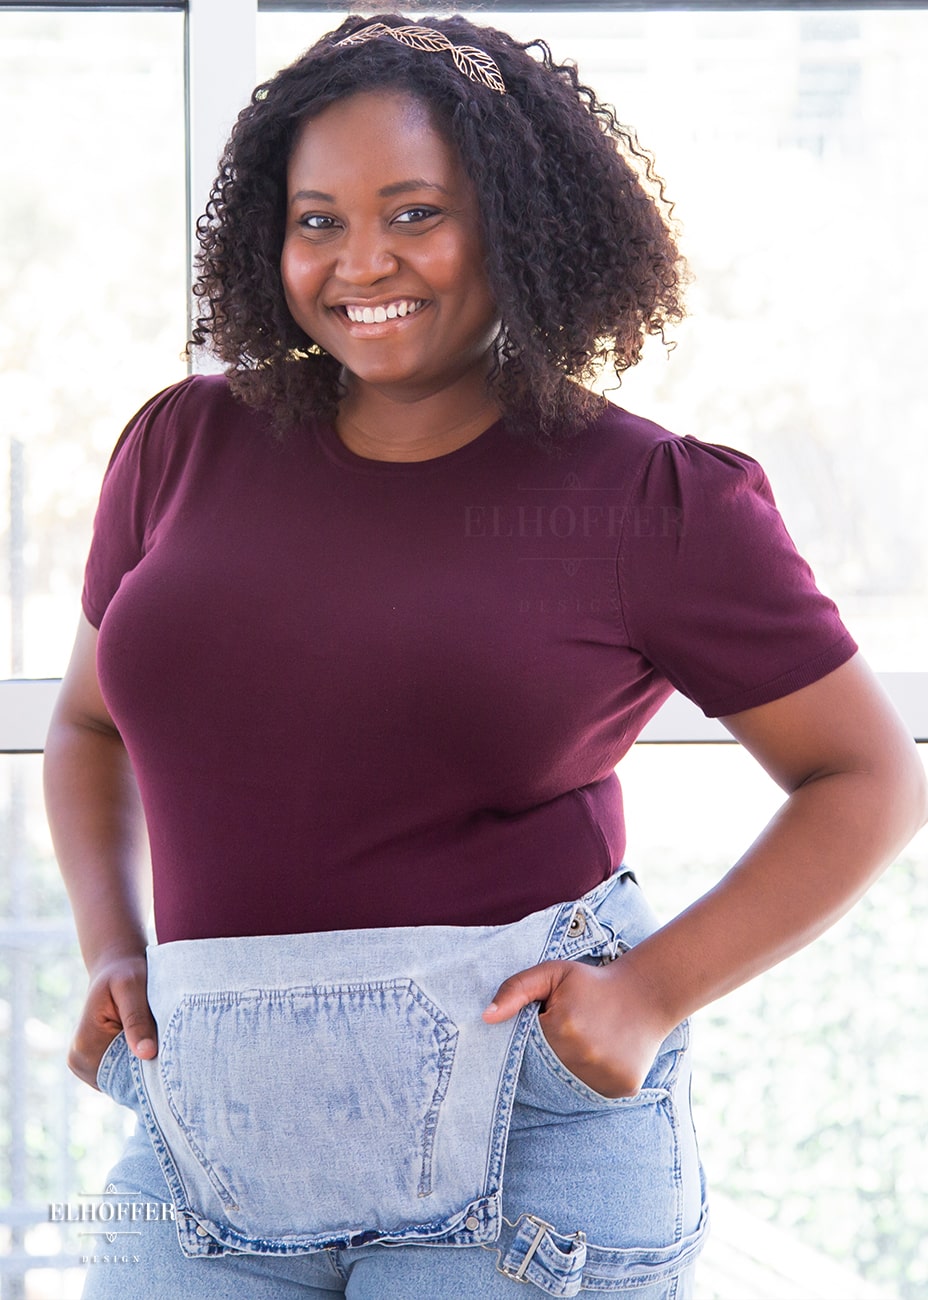 Maydelle, a medium dark skinned XL model with dark shoulder length tight curly hair, is smiling while wearing a short sleeve light weight dark reddish purple knit top. The top hits about mid hip in length and the sleeves have pleated gathering at the shoulders.